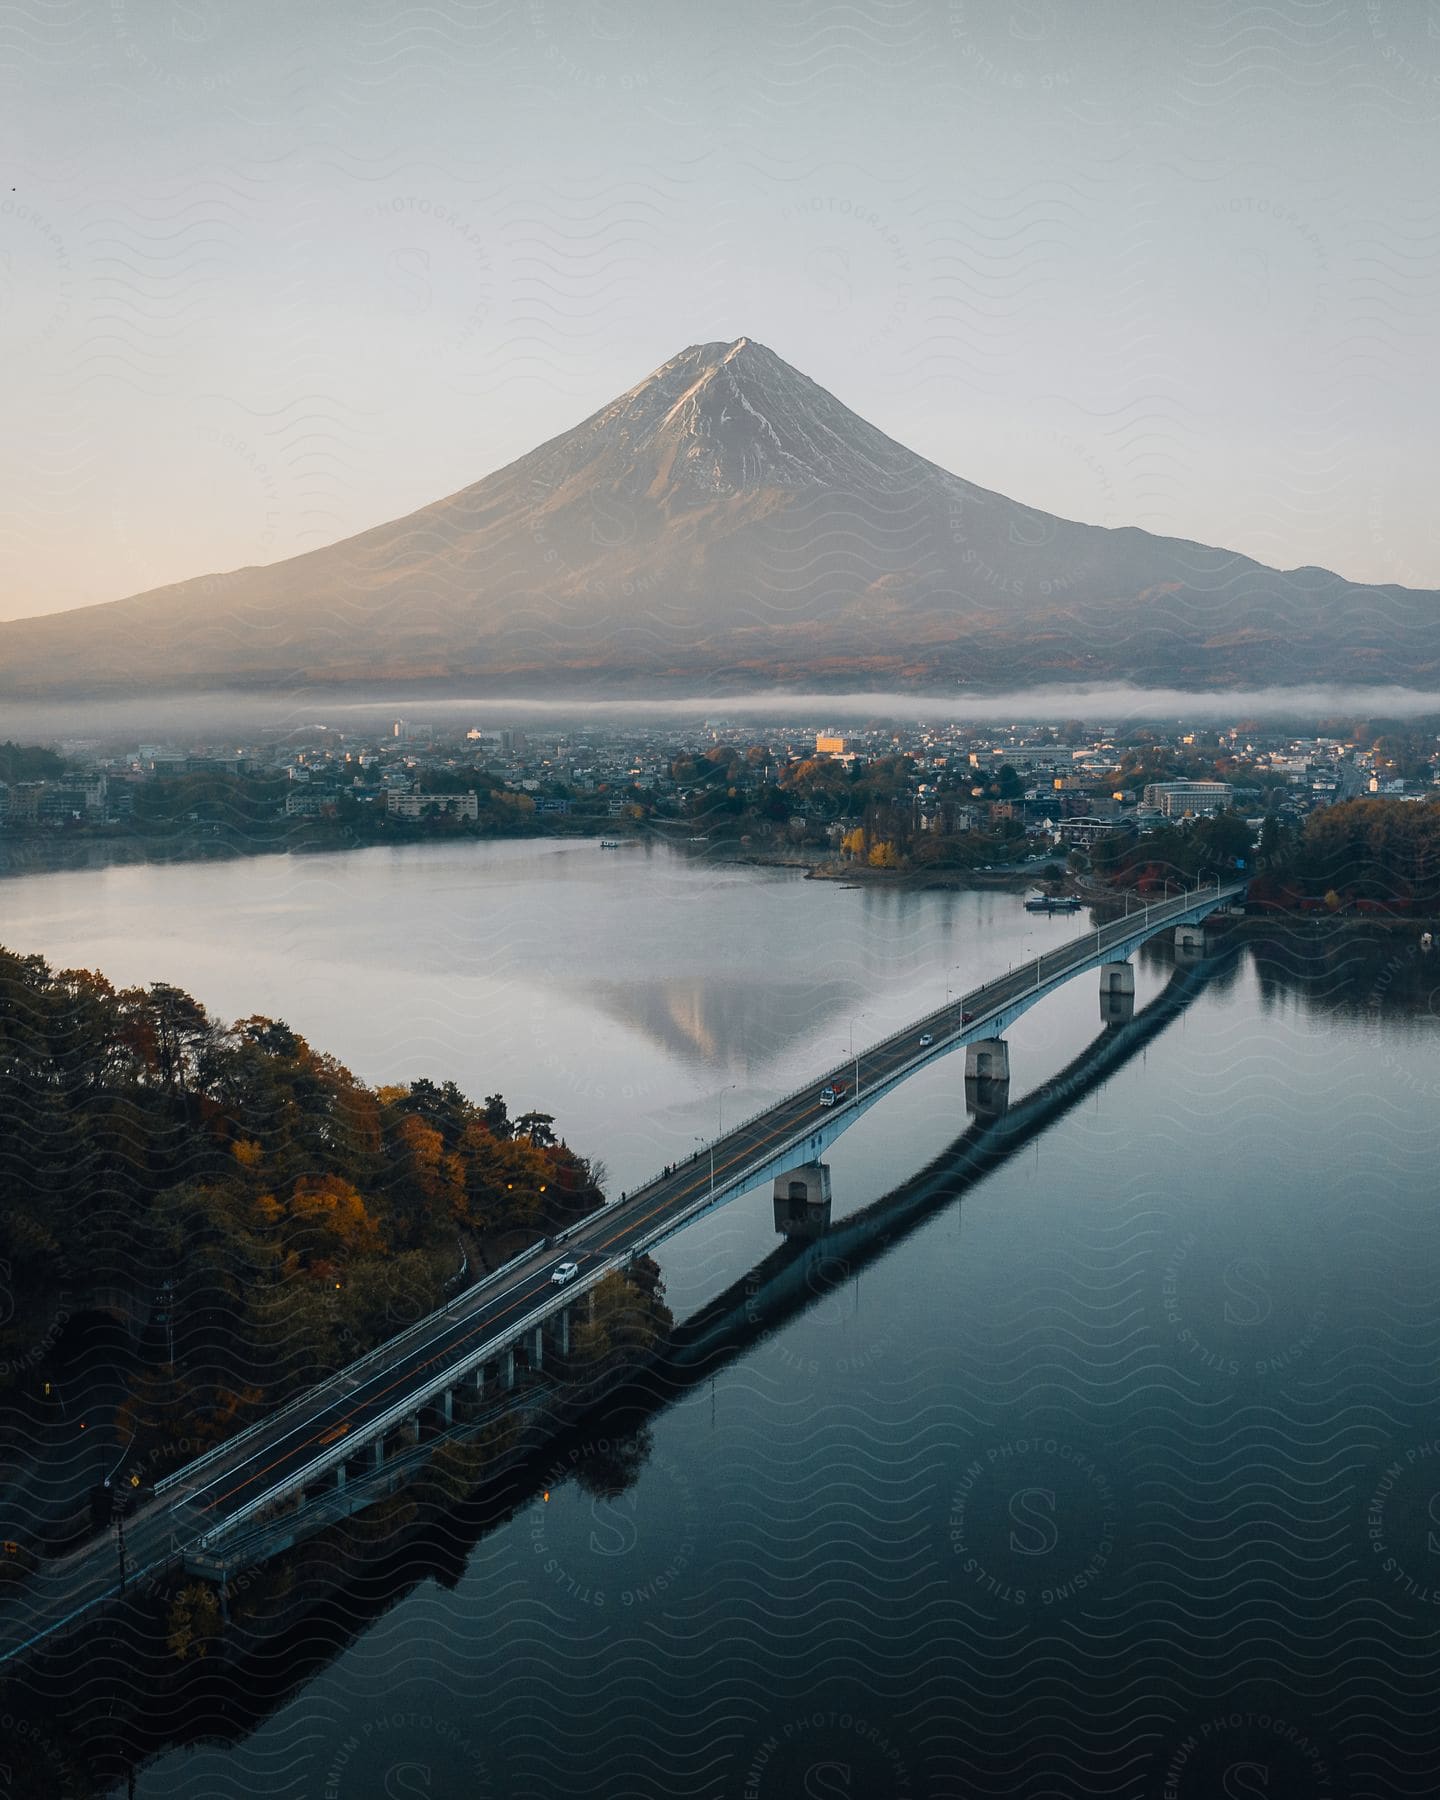 An aerial view of a bridge over water leading to a rural village with a volcano in the distance